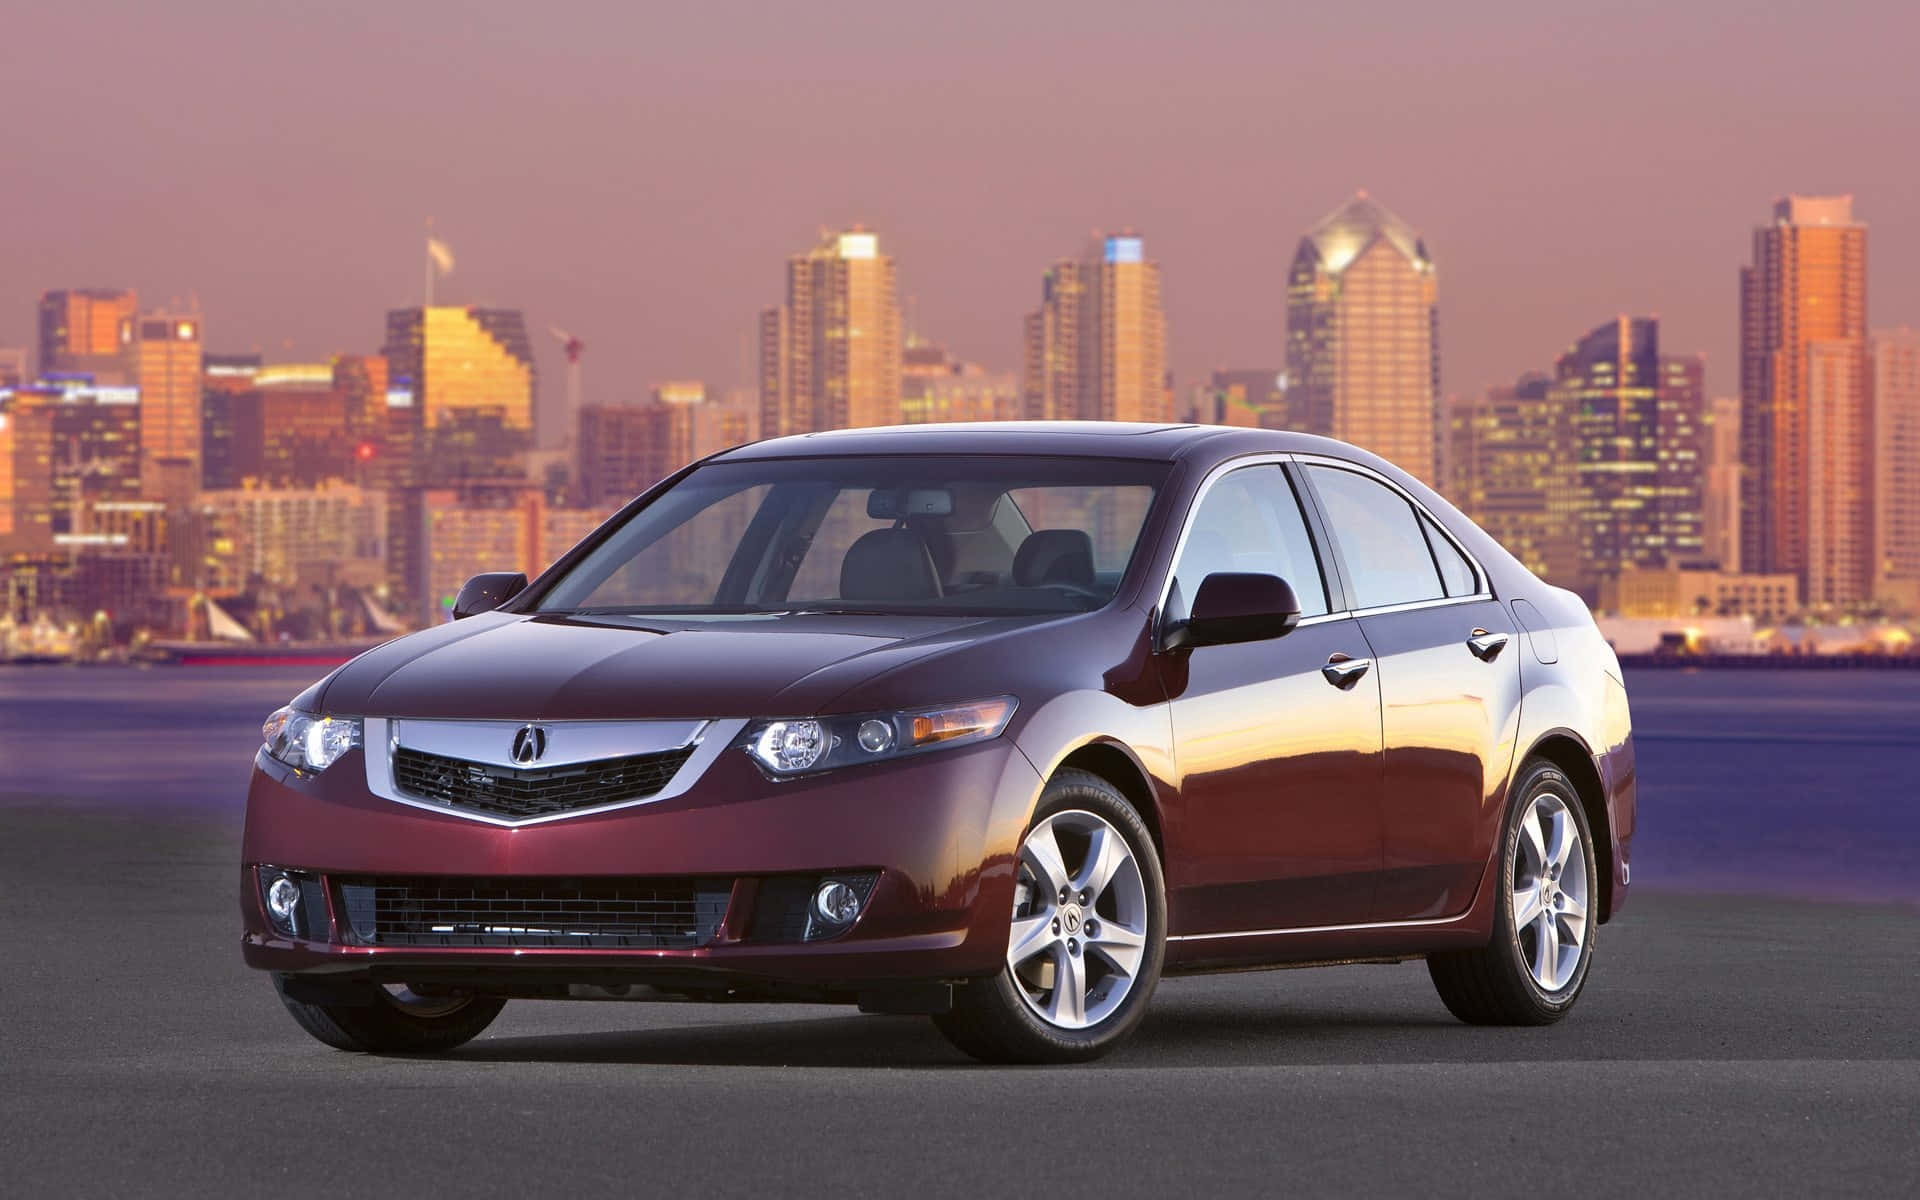 Caption: Sleek Acura TSX in a picturesque landscape Wallpaper